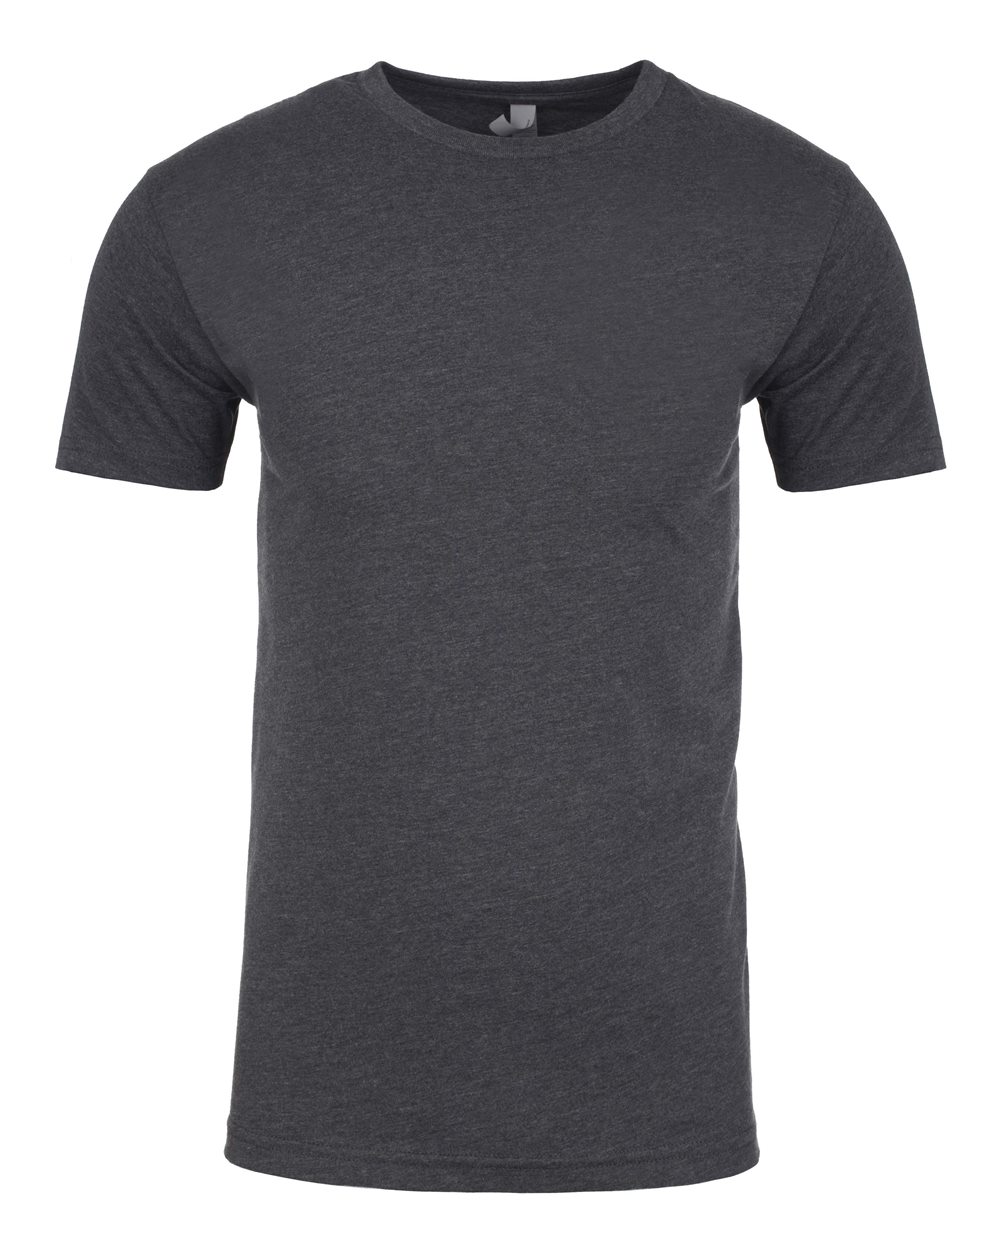 Next Level Premium Fitted Sueded Crew T Shirt Blank Plain 6410 up to 3XL | eBay